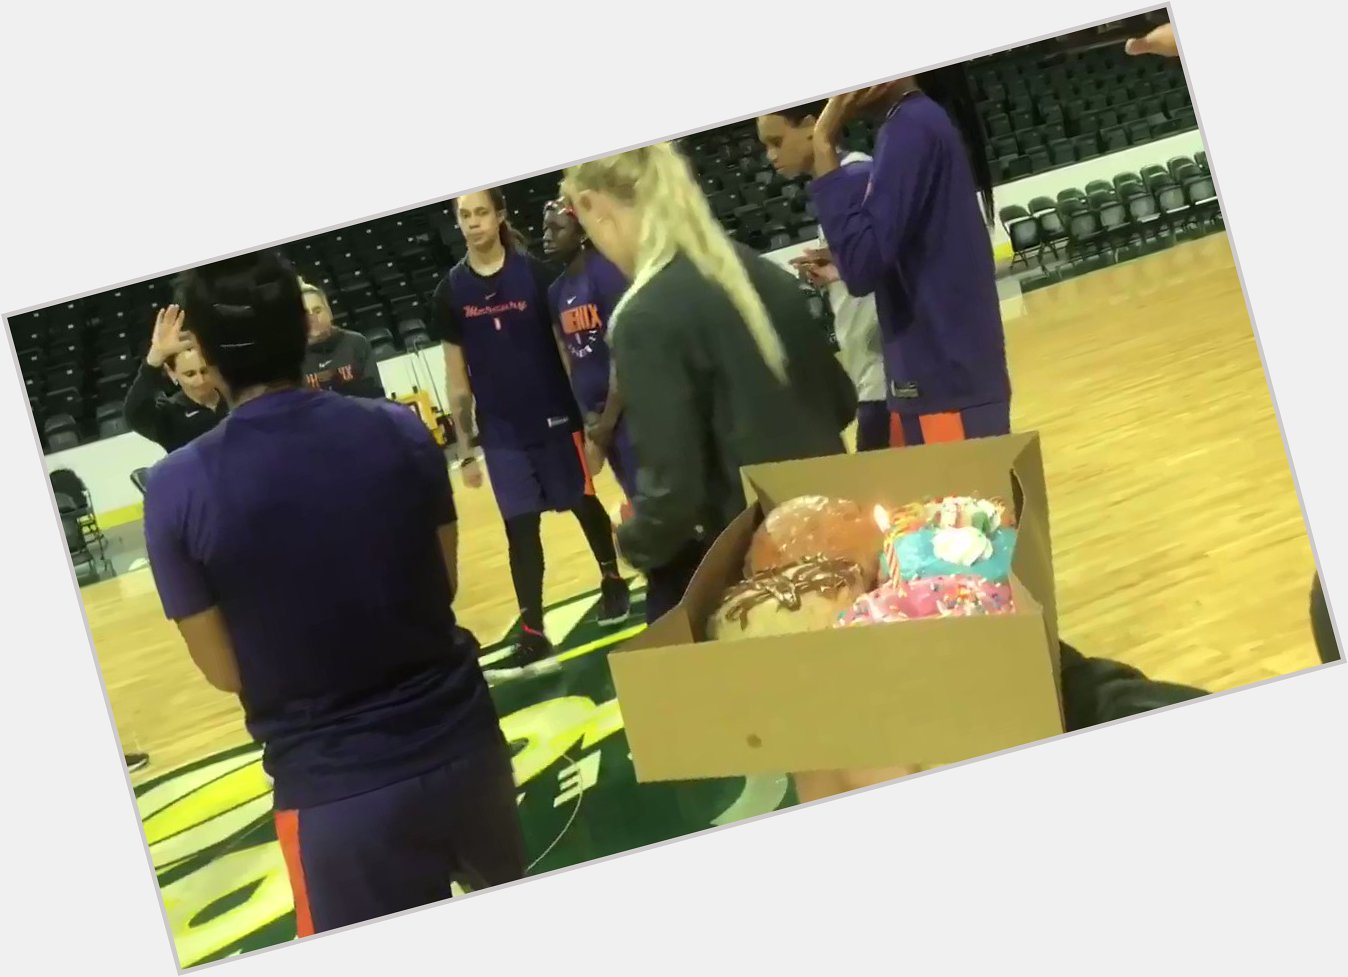 Double the birthdays, double the treats!

Happy birthday to Penny Taylor and Athletic Trainer Alicia Yamamoto! 